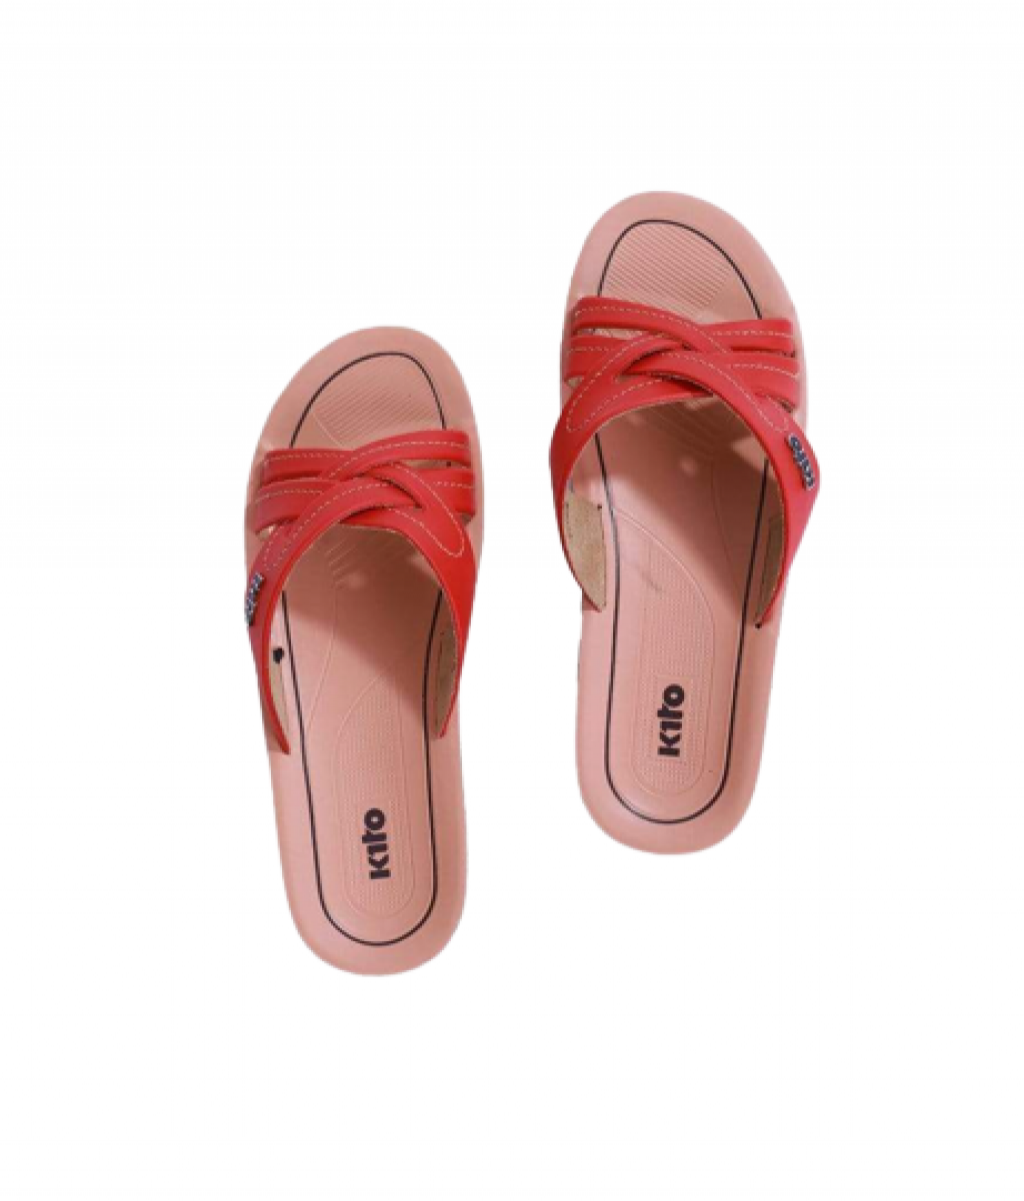 16615016800_kito-flipflop-slippers-kito-an8w-29868868632749_9e50f26c-c7c7-4be2-9038-b3602931d774-removebg-preview_1800x1800.png